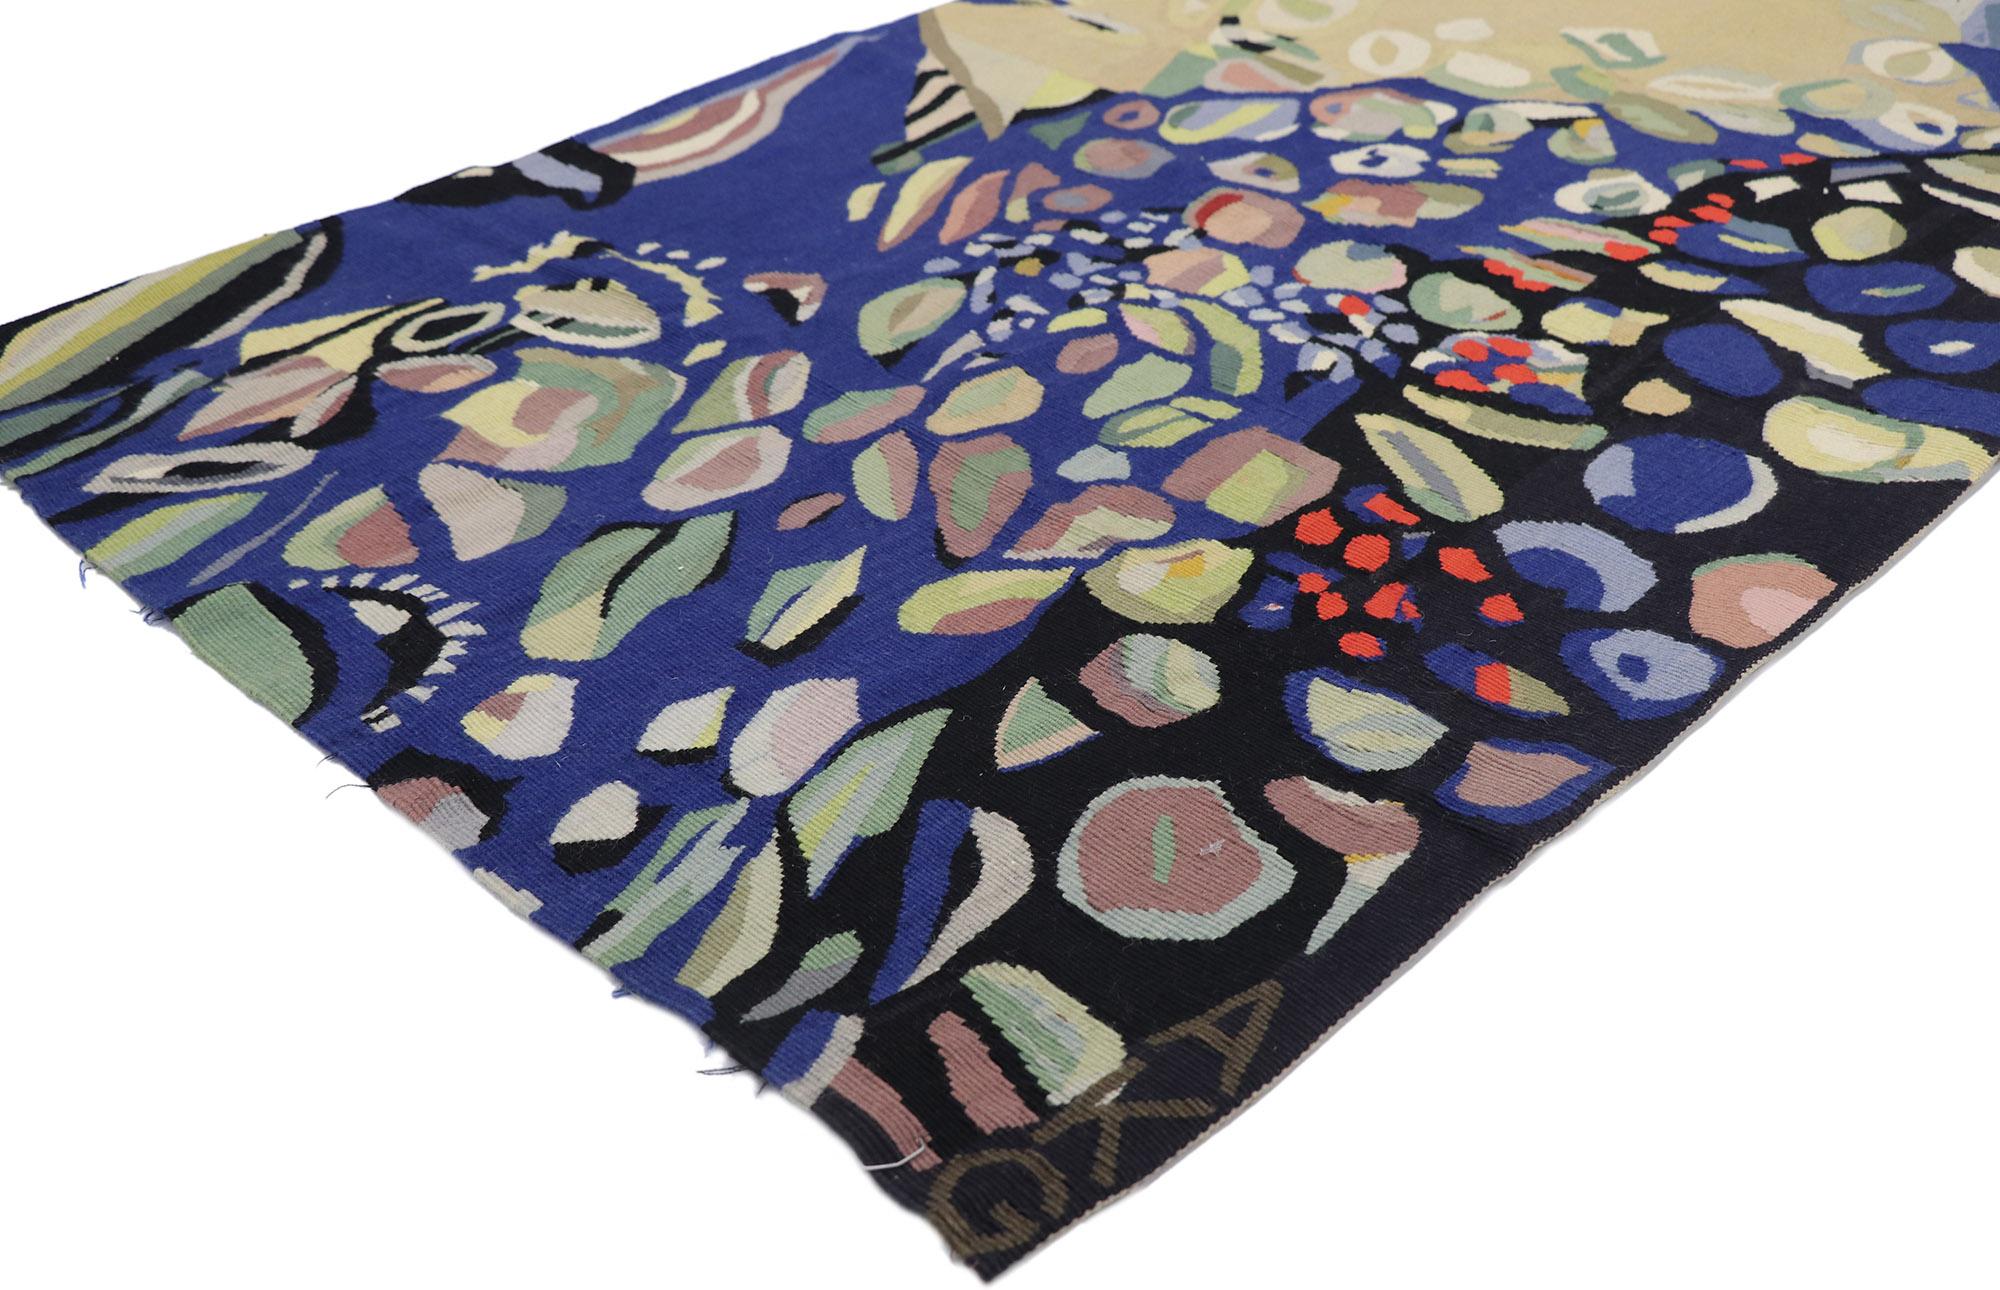 78098 Vintage German Alice Koch-Gierlichs Tapestry with Abstract Biomorphic Style 03'00 x 04'10. Showcasing a bold expressive design, incredible detail and texture, this hand woven wool Vintage German Alice Koch-Gierlichs tapestry is a captivating